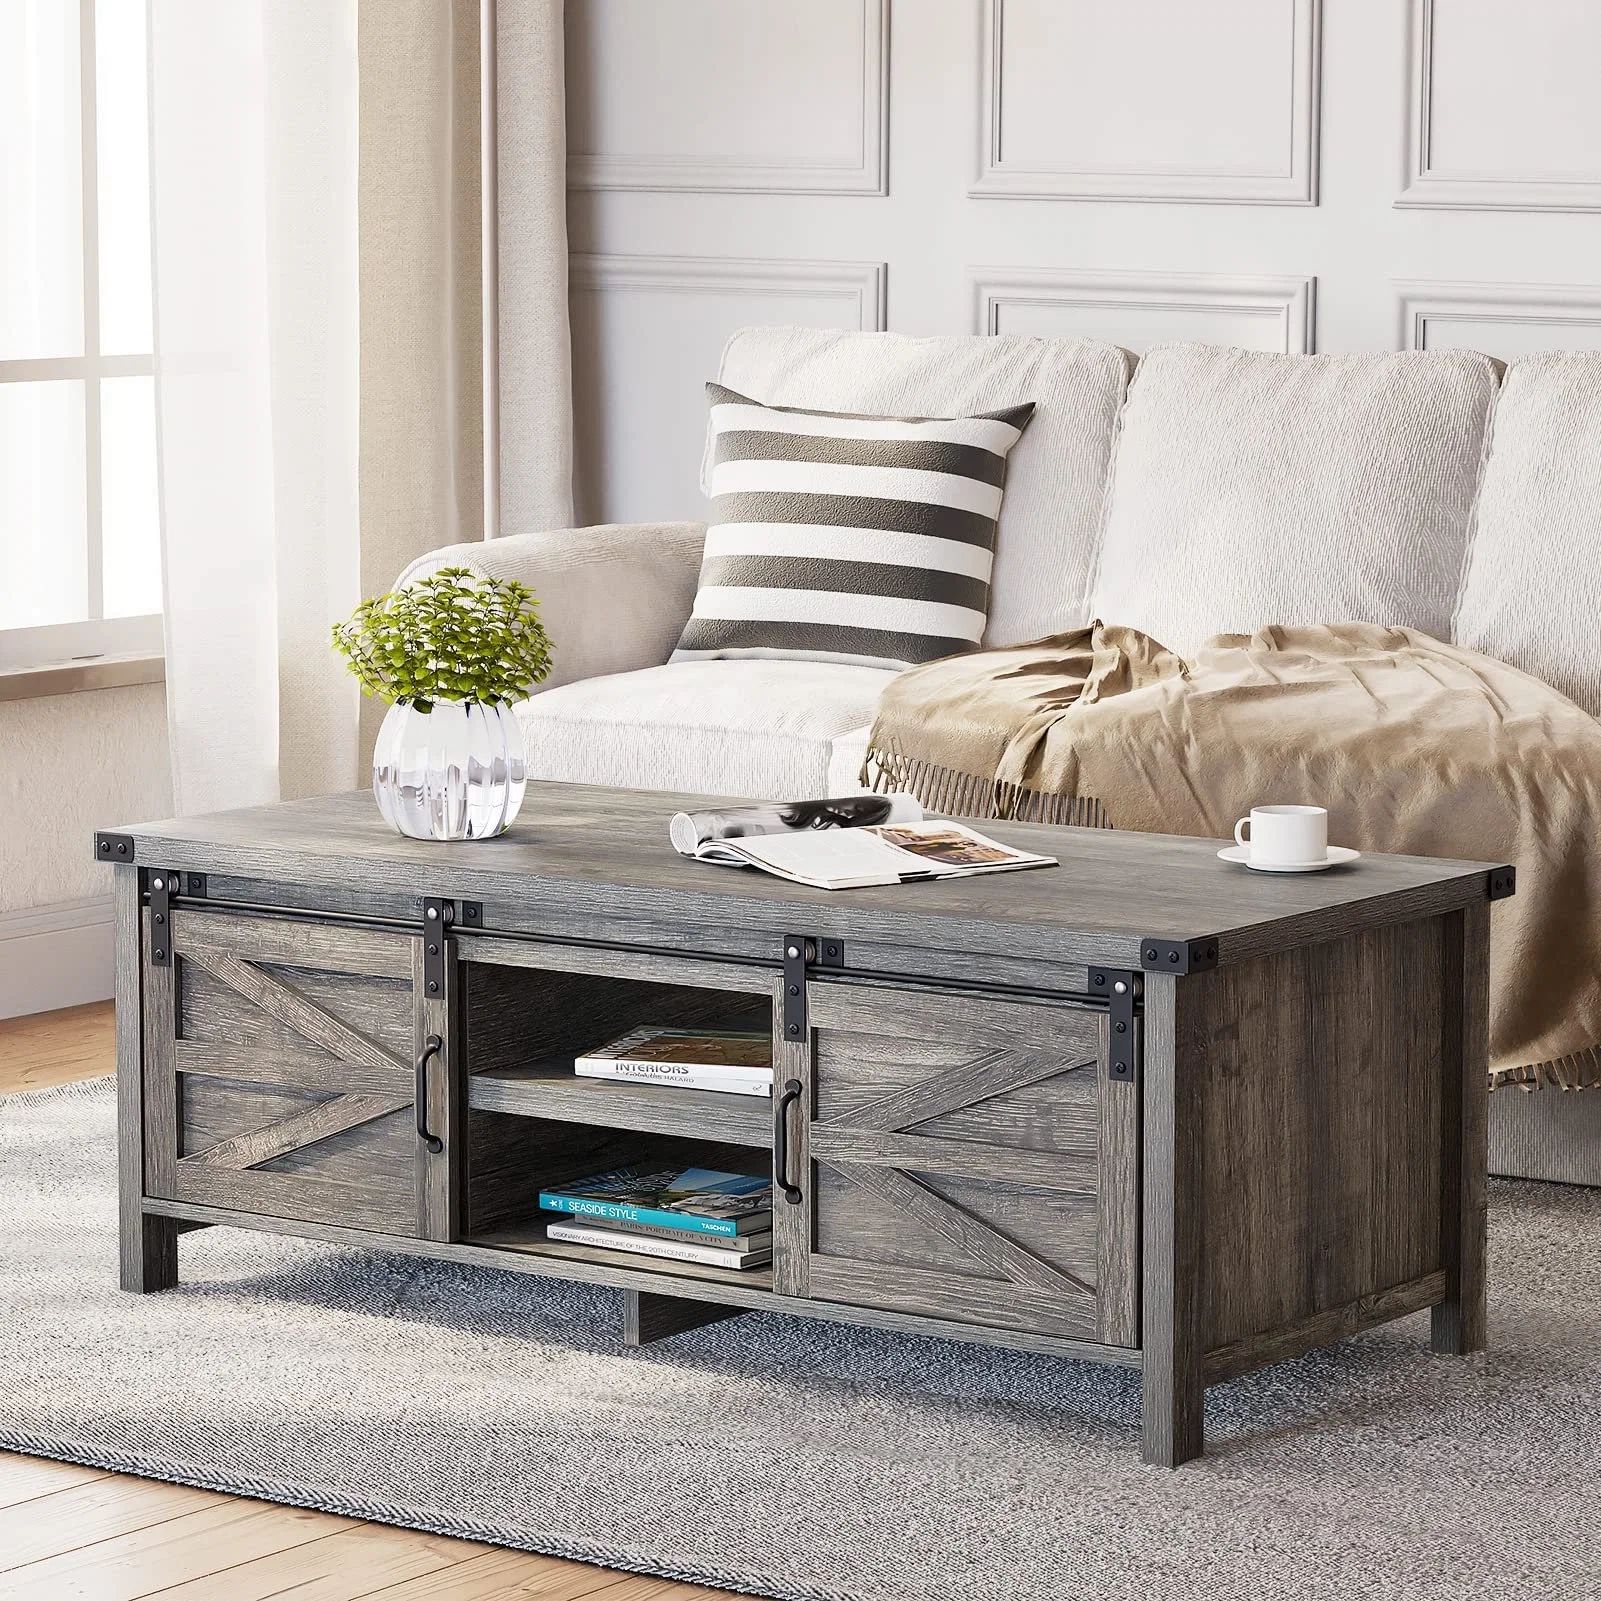 Wood Coffee Table With Storage, Rustic Center Rectangular Tables For Living  Room, W/sliding Barn Doors & Storage Cabinet Shelves, For Bedroom, Office,  – China Coffee Table, Barn Doors Coffee Table | Made In China Inside Simple Design Coffee Tables (View 11 of 15)